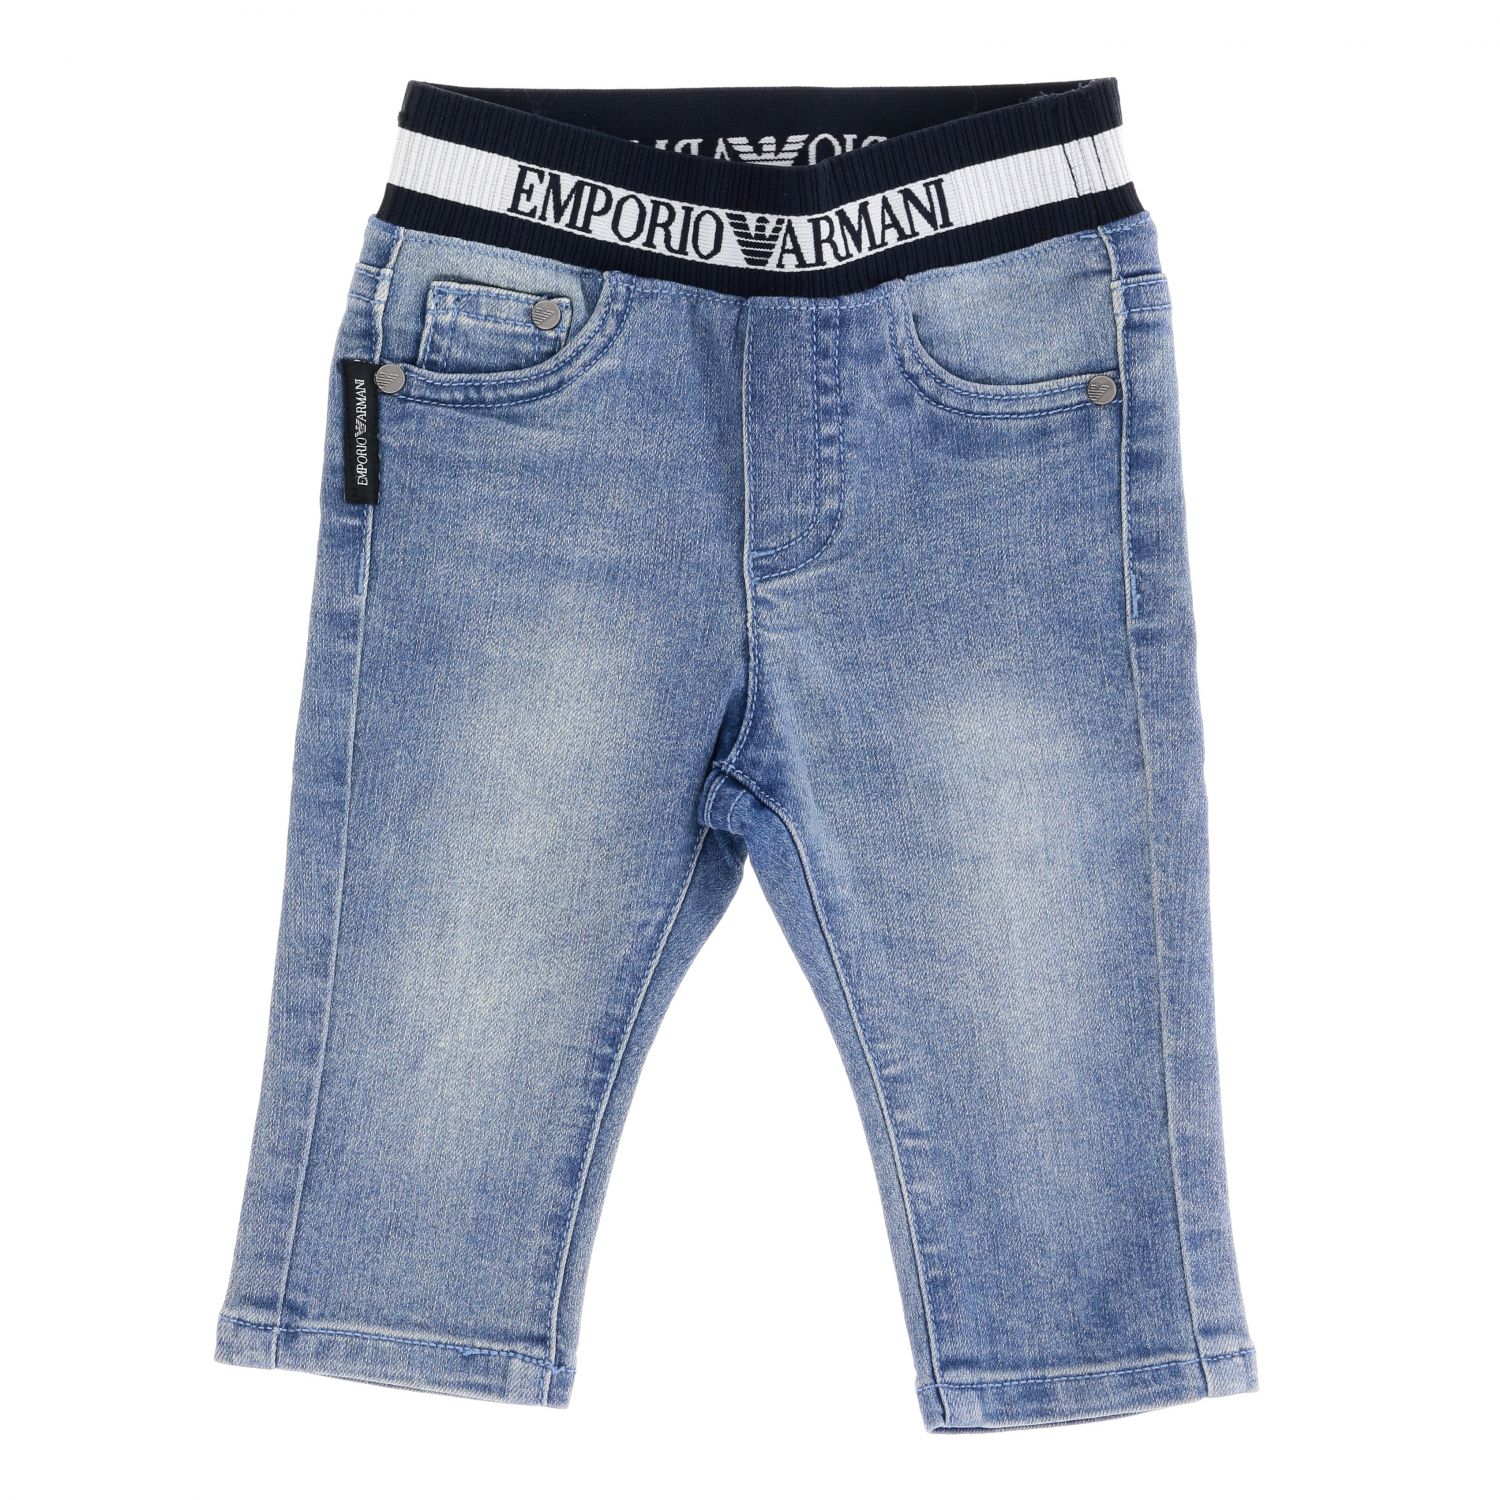 Emporio Armani Outlet: jeans in used denim with logoed band - Denim ...